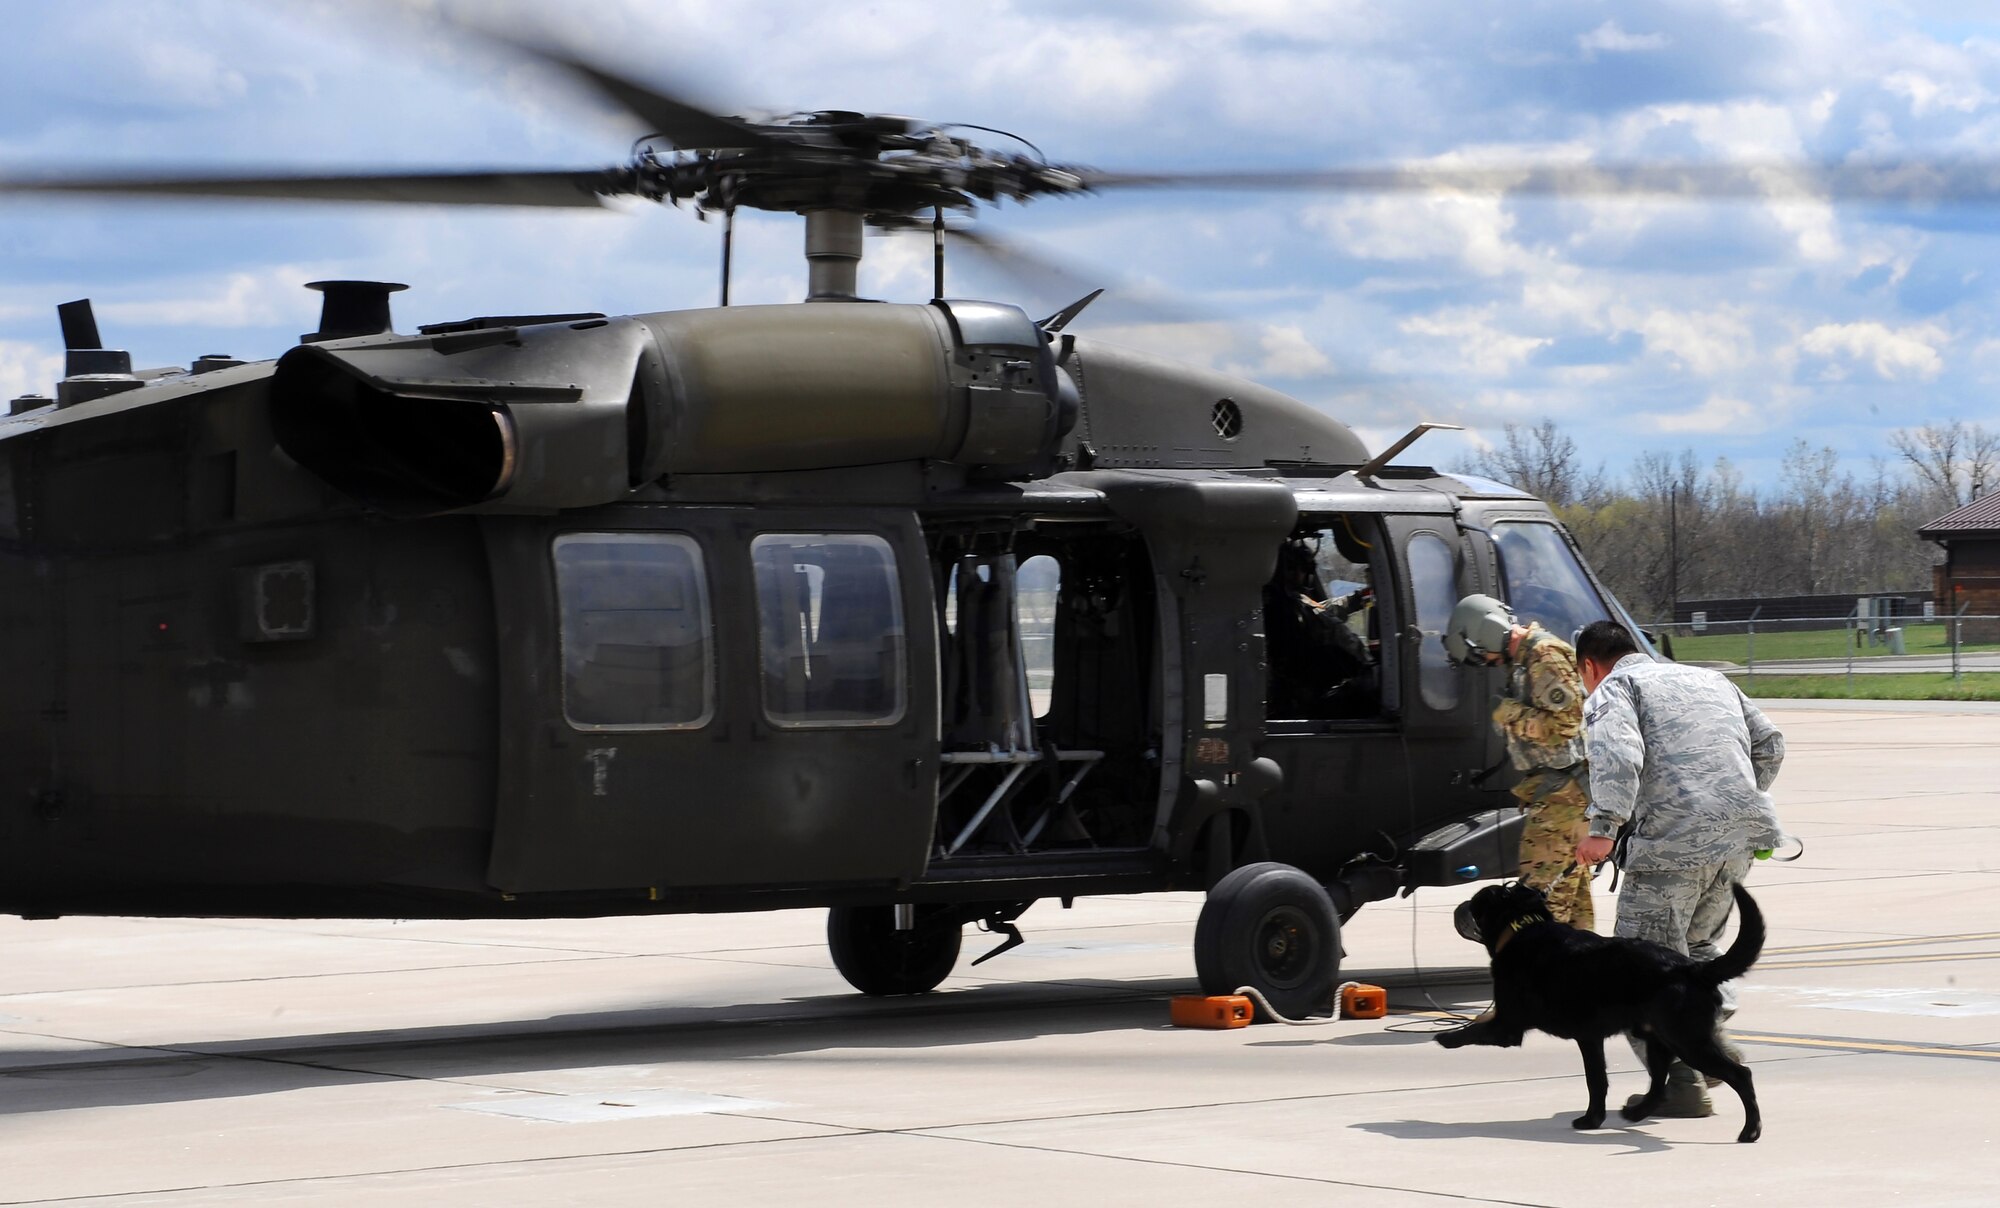 U.S. Air Force Staff Sgt. Ki Seung Nam, a 509th Security Forces Squadron military working dog (MWD) handler, runs toward a UH-60 Black Hawk helicopter with MWD Buda for an orientation flight at Whiteman Air Force Base, Mo., April 1, 2016. The 1-135th Attack Reconnaissance Battalion trains with the 509th Security Forces Squadron’s MWDs and their handlers for search and rescue or other operations that would require the MWDs to be air lifted. (U.S. Air Force photo by Airman 1st Class Michaela R. Slanchik)